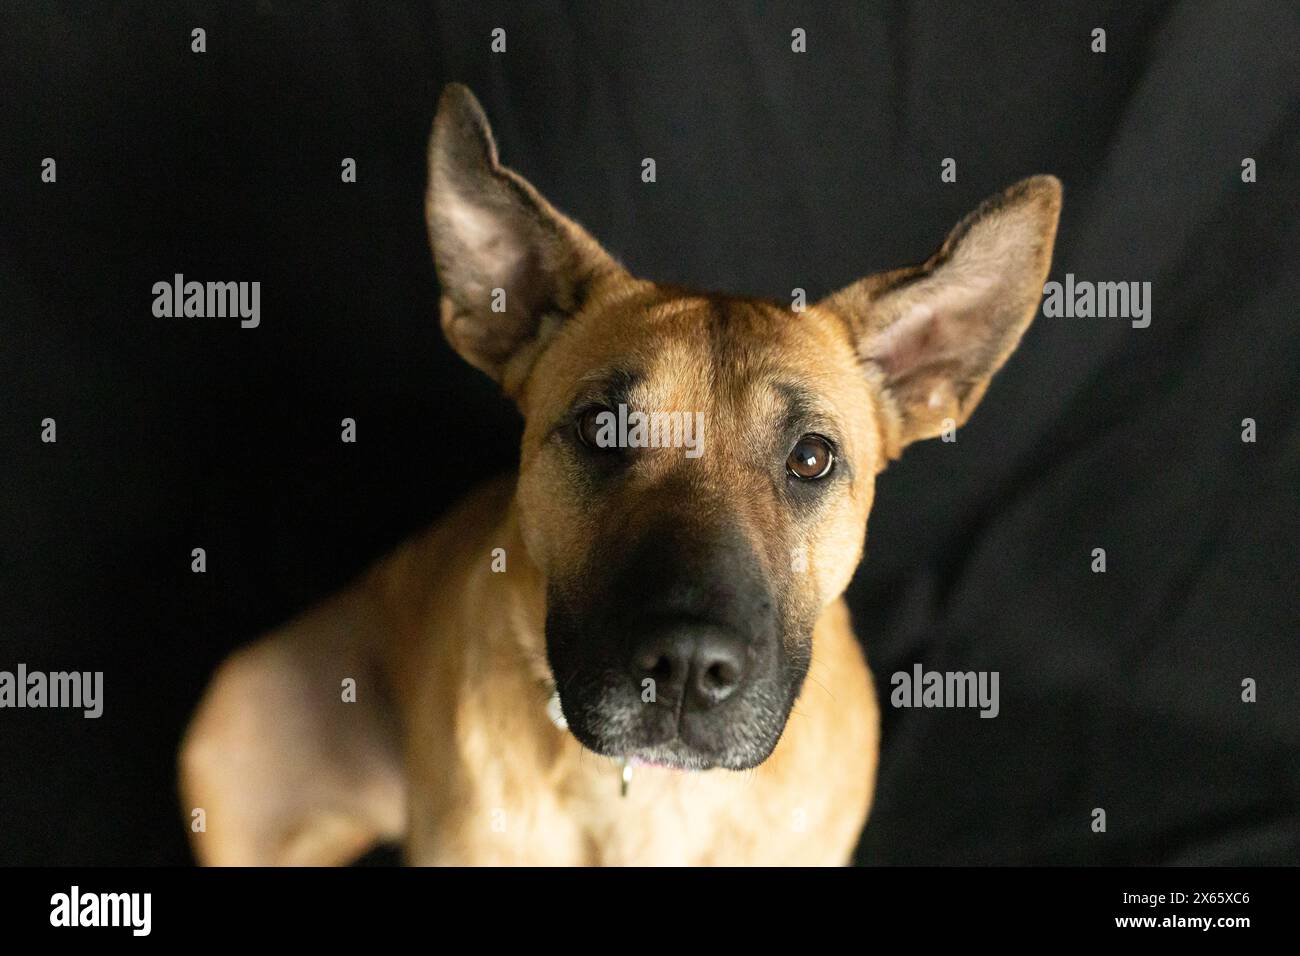 Close-up of attentive brown dog on black background Stock Photo